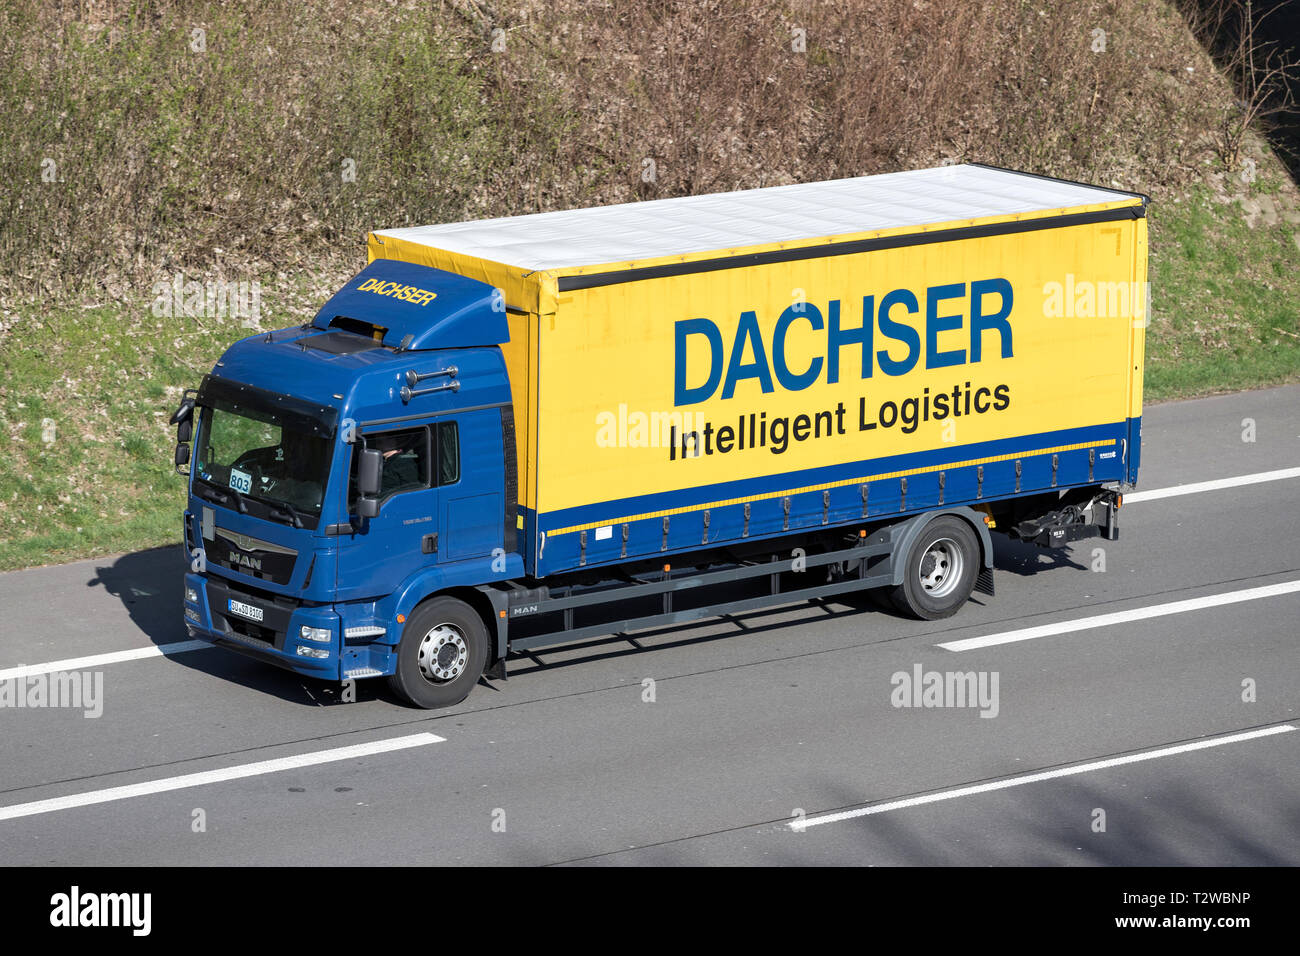 Dachser truck on motorway. Dachser is a German logistics company, founded by Thomas Dachser in 1930, with its headquarters in Kempten in the Allgäu re Stock Photo